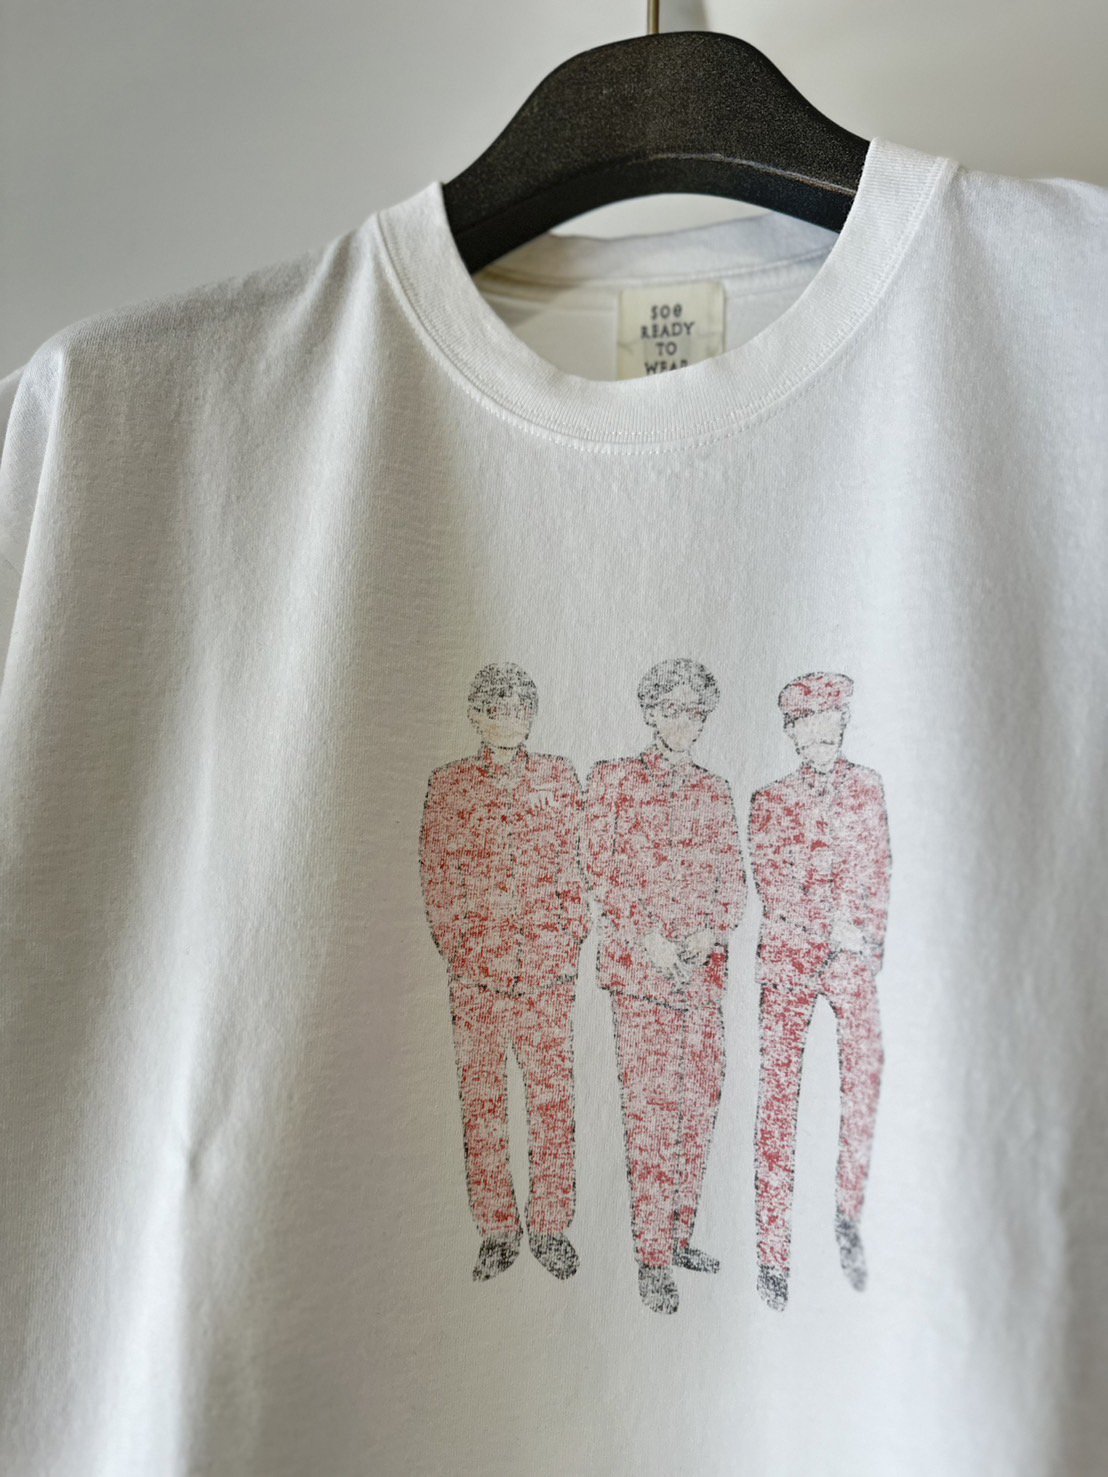 soe<br />YMO T Shirts / WHITE<img class='new_mark_img2' src='https://img.shop-pro.jp/img/new/icons47.gif' style='border:none;display:inline;margin:0px;padding:0px;width:auto;' />